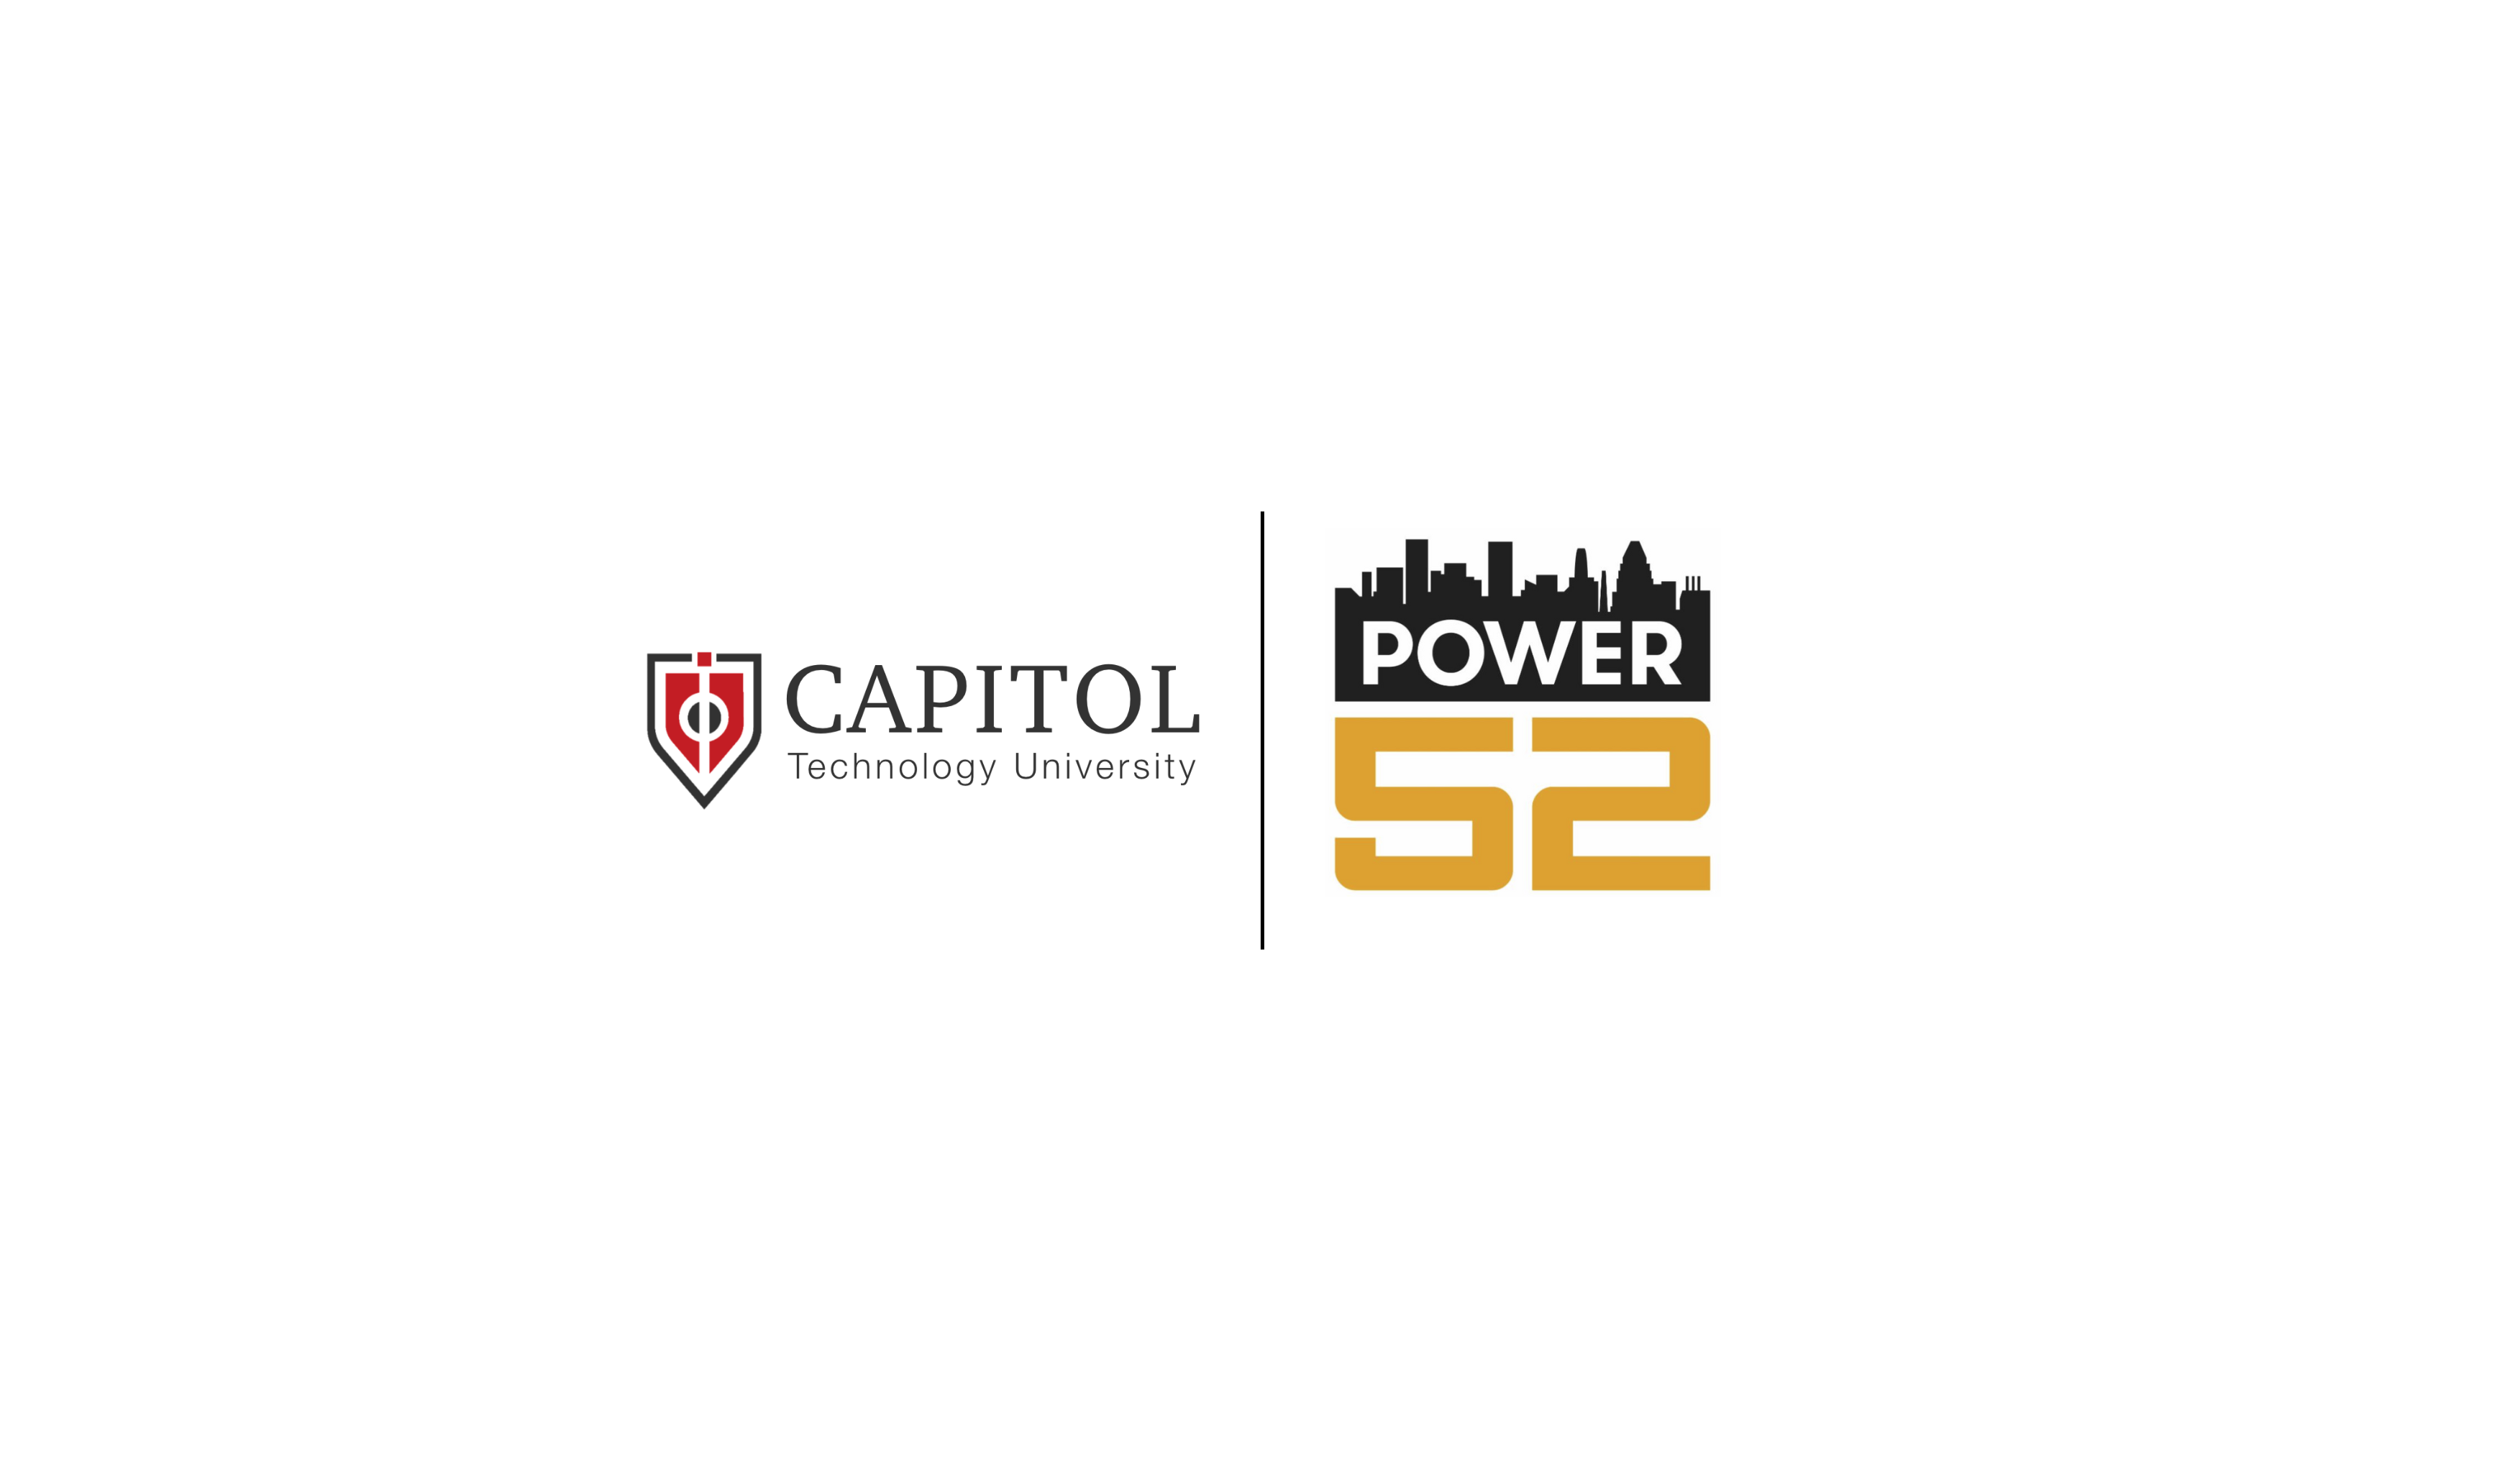 Capitol and Power 52 MOU Signing